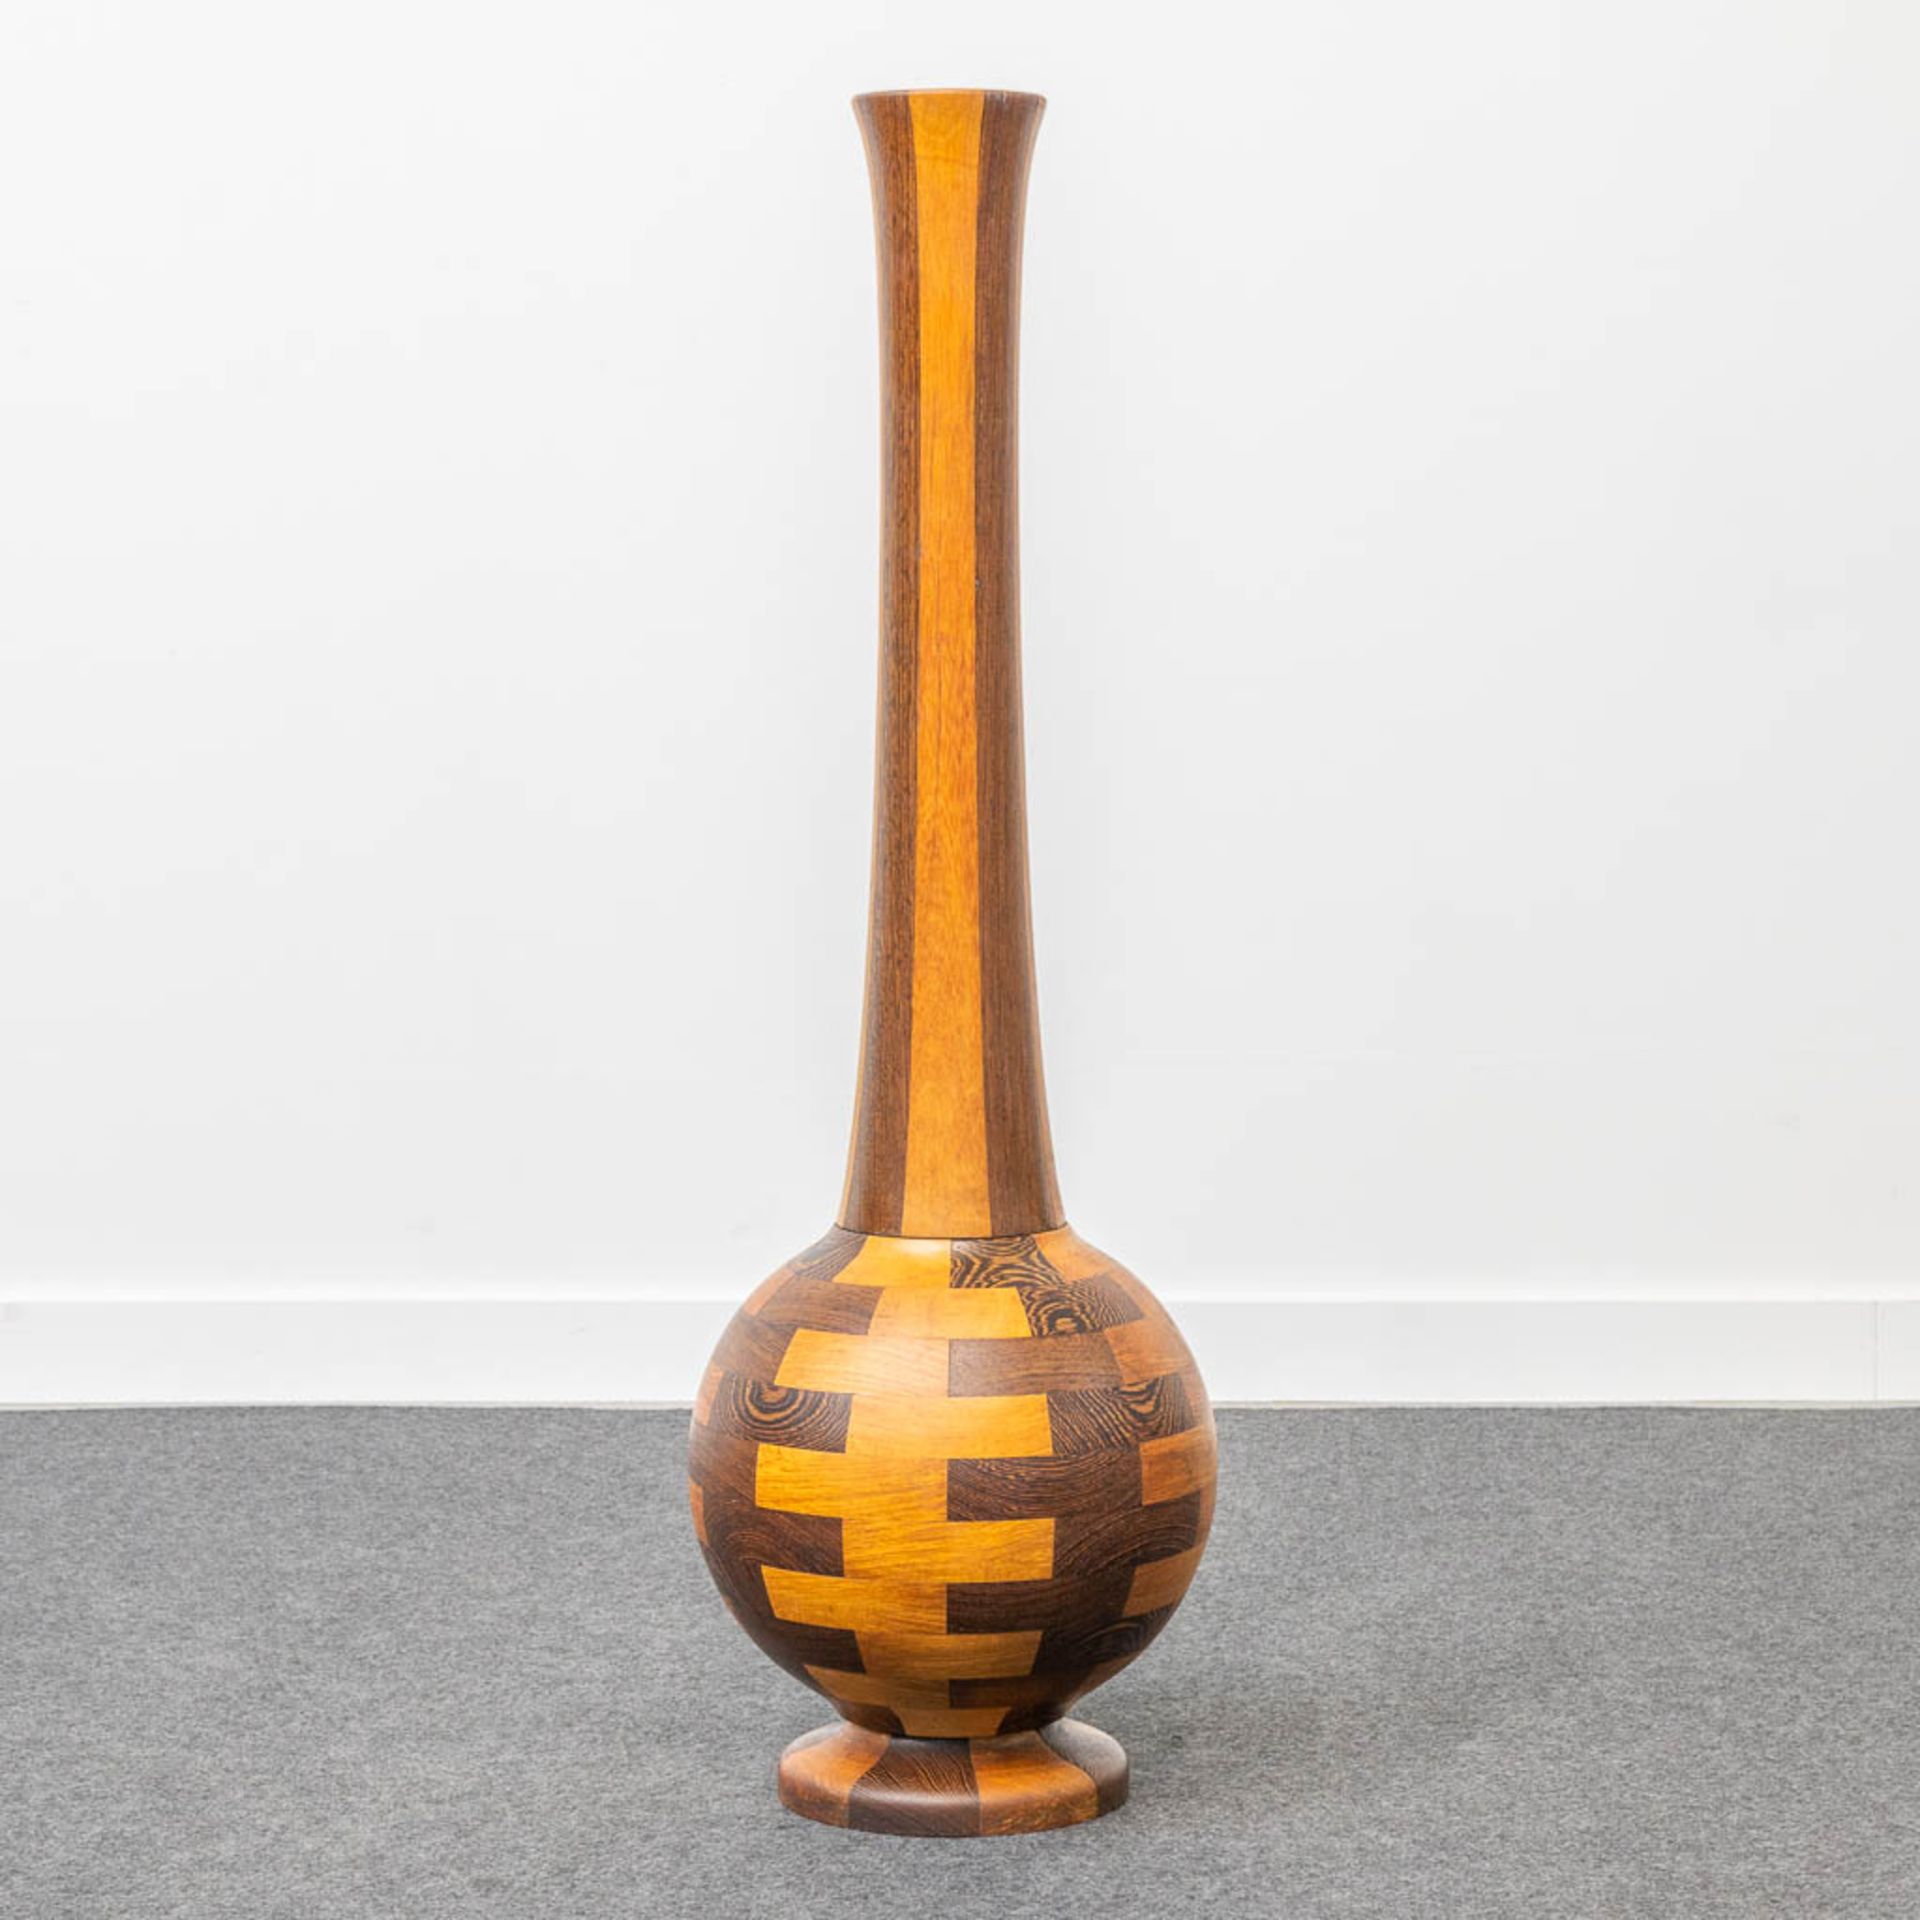 A collection of 4 wood-turned vases with inlay, made by DeCoene in Kortijk, Belgium. - Image 2 of 11